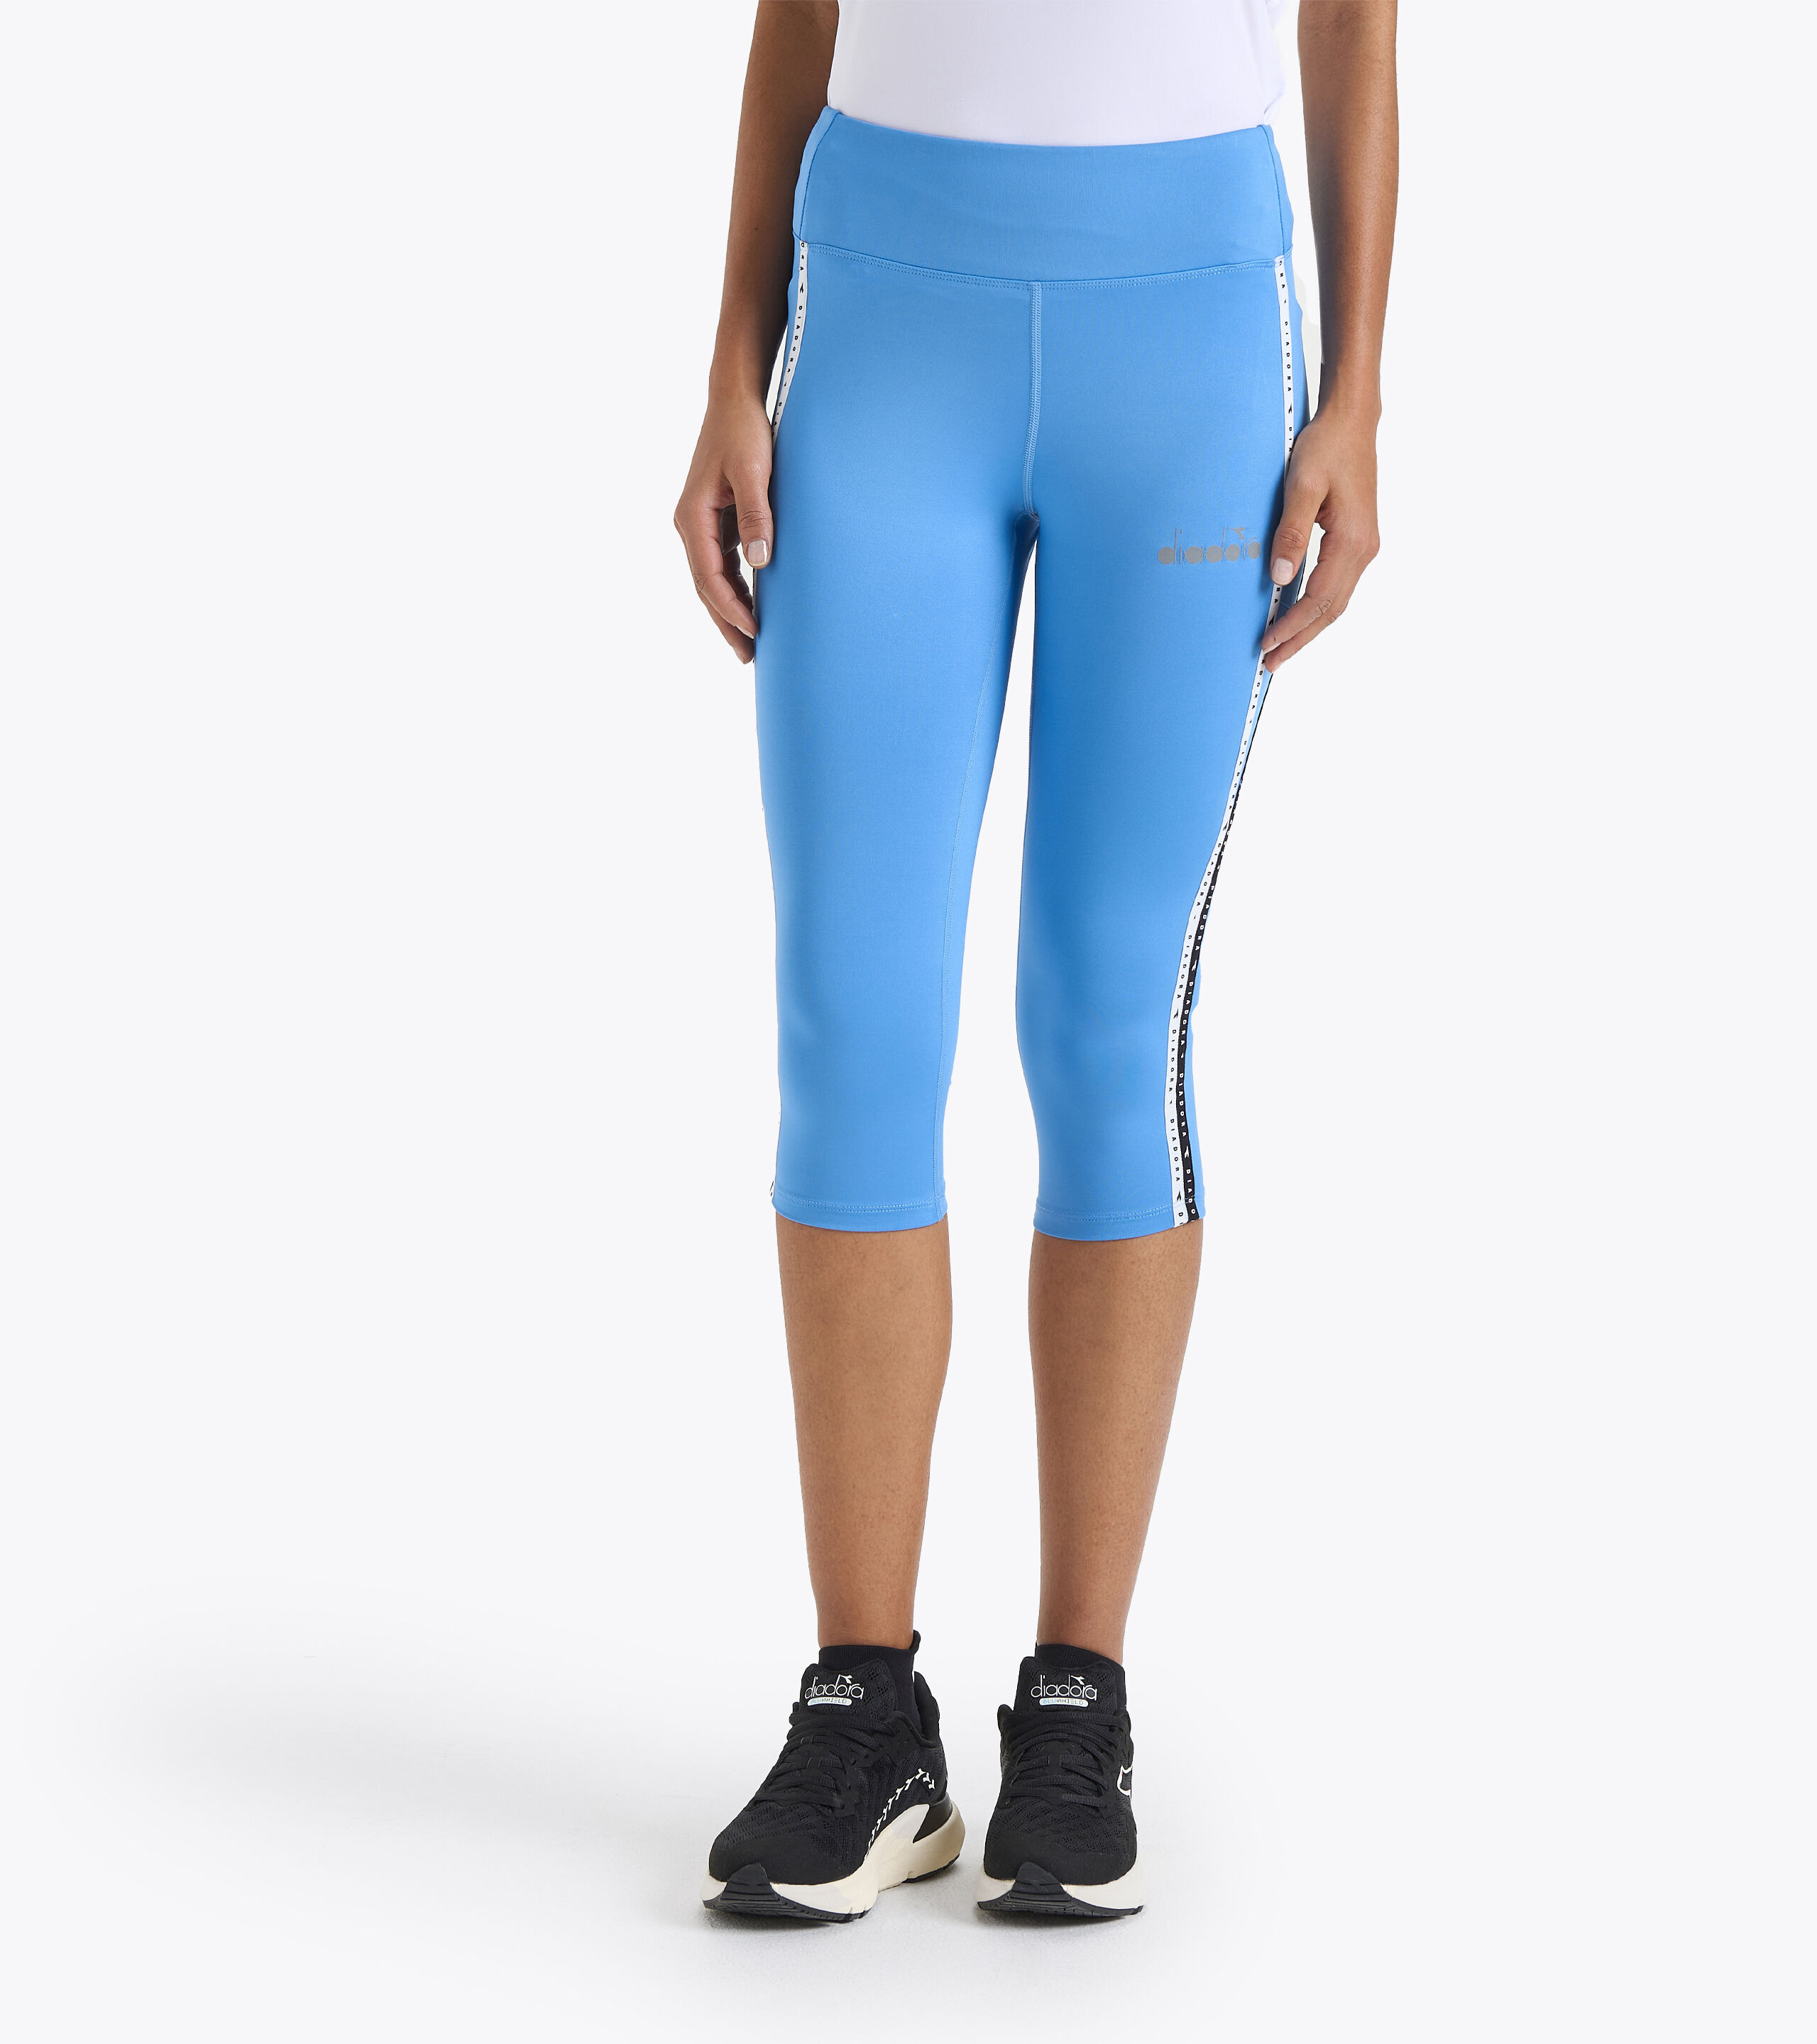 Shop Women's Tights Online | Stirling Sports - Amy 3/4 Tight